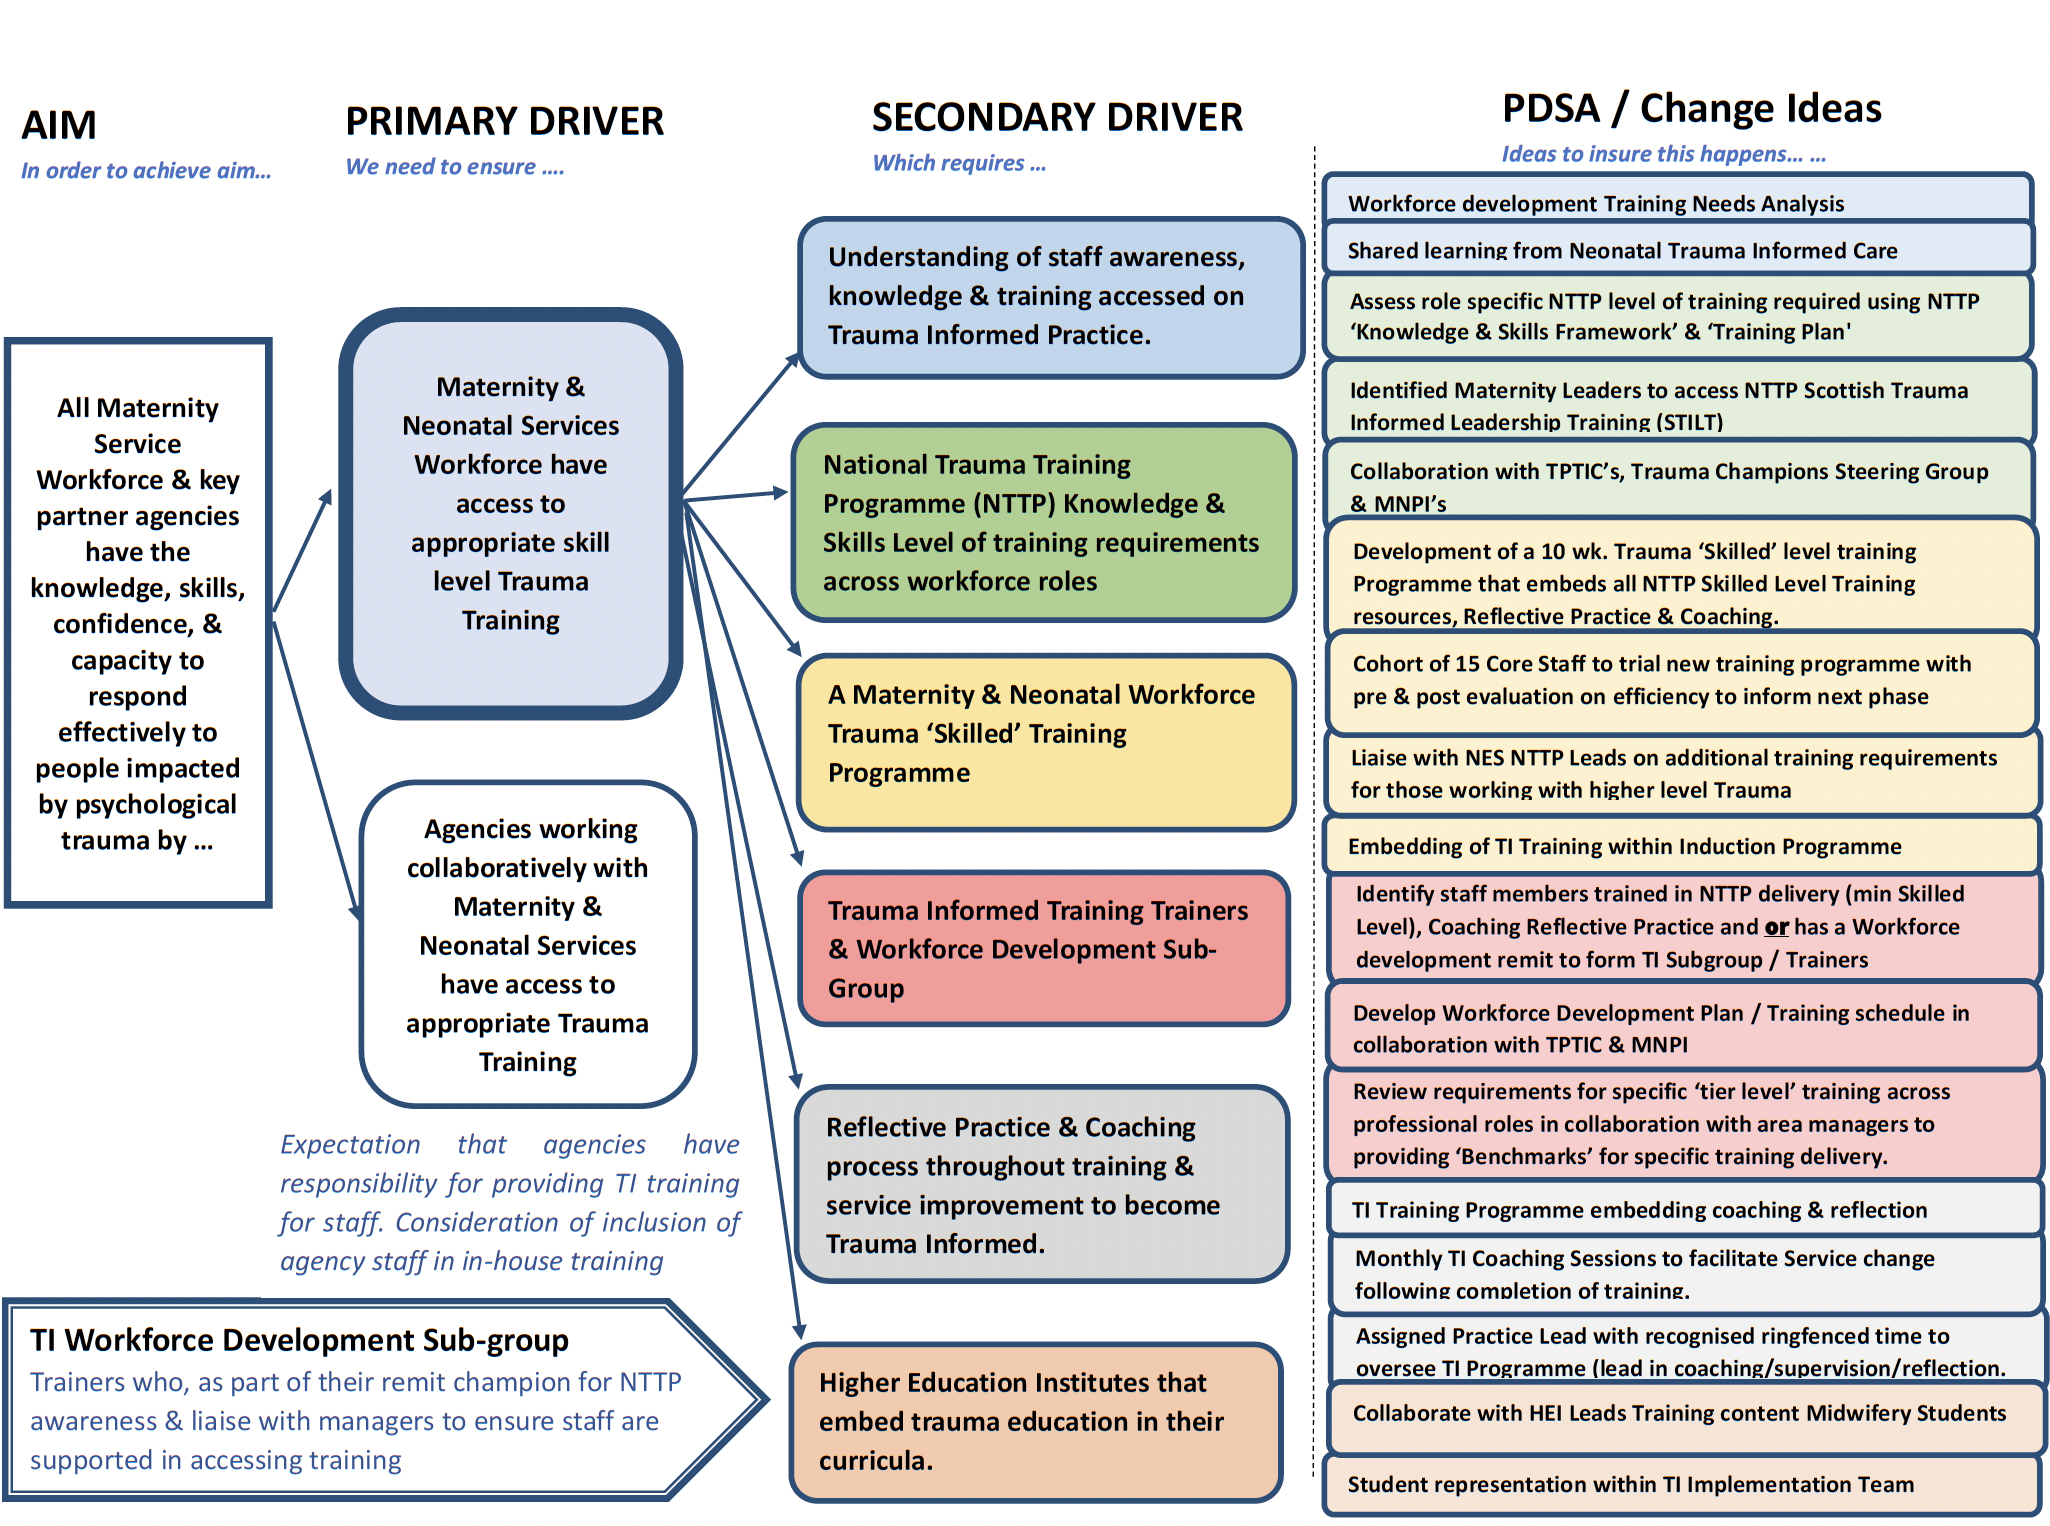 This diagram sets out that all staff need the knowledge, skills, capacity and confidence to respond effectively to those impacted by psychological trauma. It sets out the steps that need to be taken (including primary and secondary drivers and a number of key change ideas) to achieve that overarching aim. It highlights a range of measures such as the need for the development of a trauma-skilled level training programme for the core maternity and neonatal workforce.